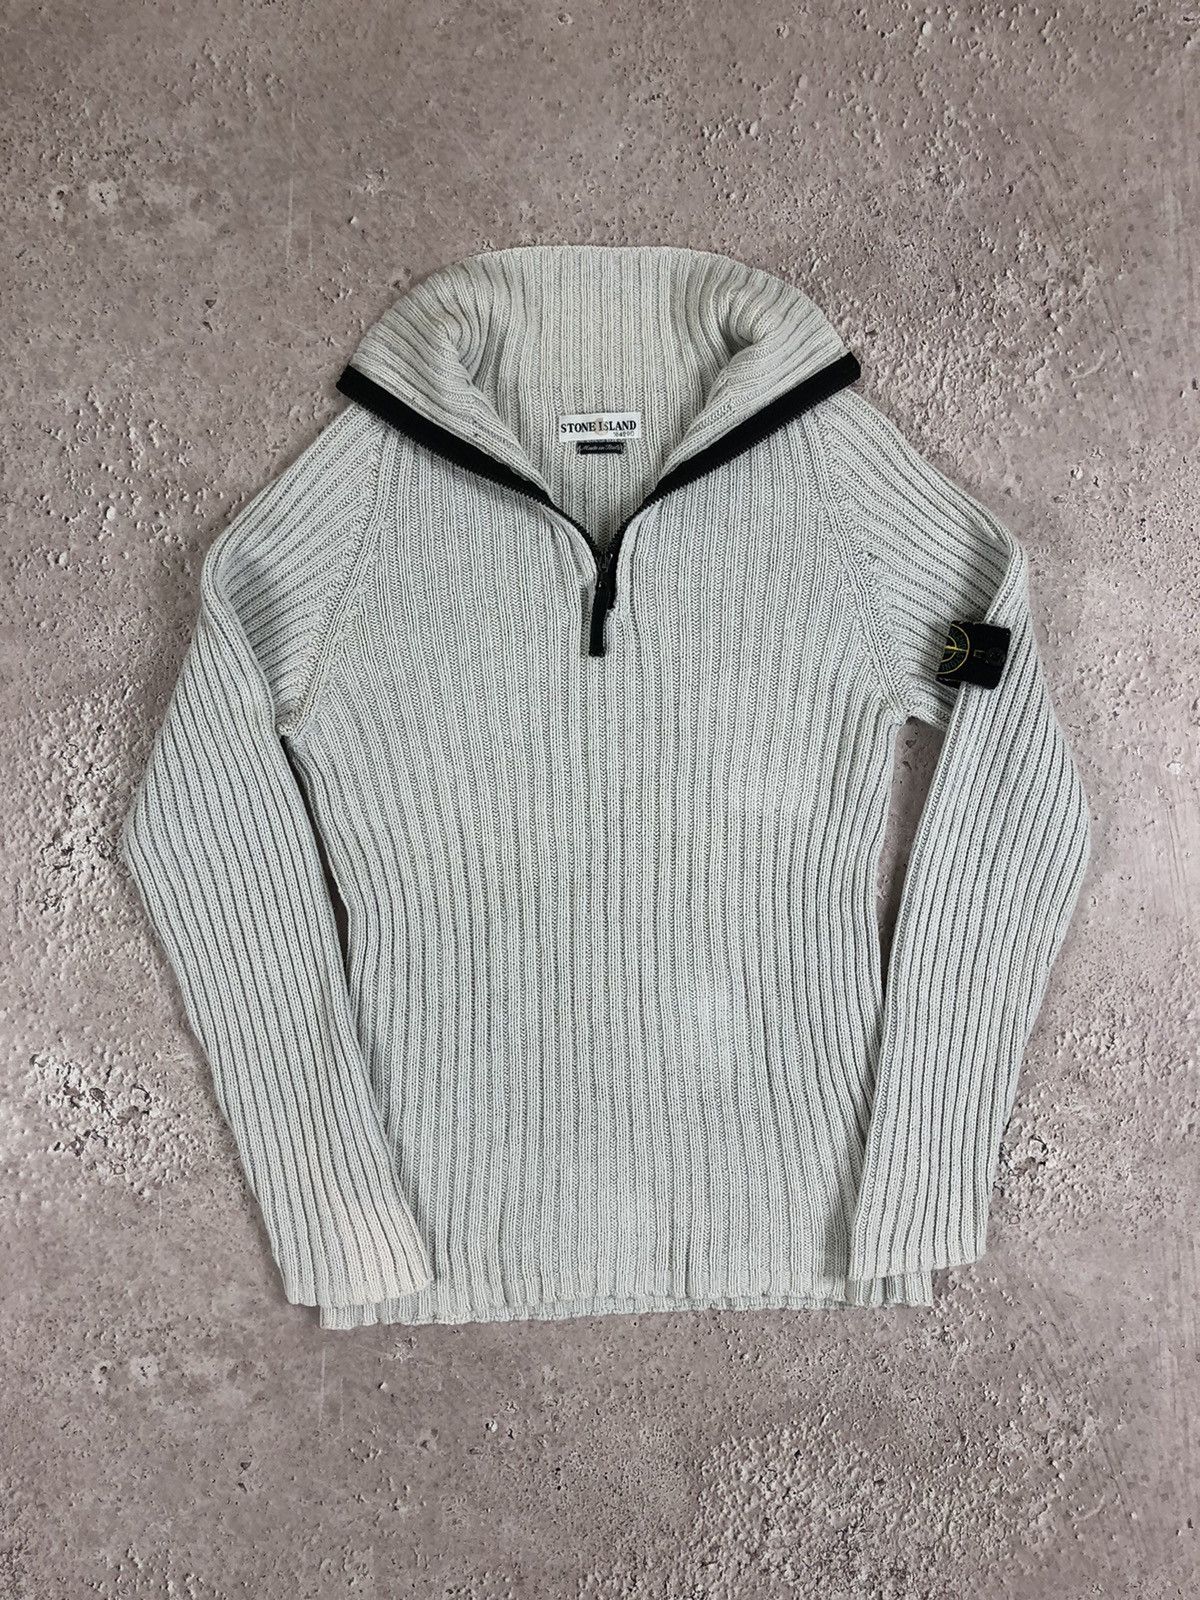 Pre-owned Stone Island Vintage Sweater In Light Gray